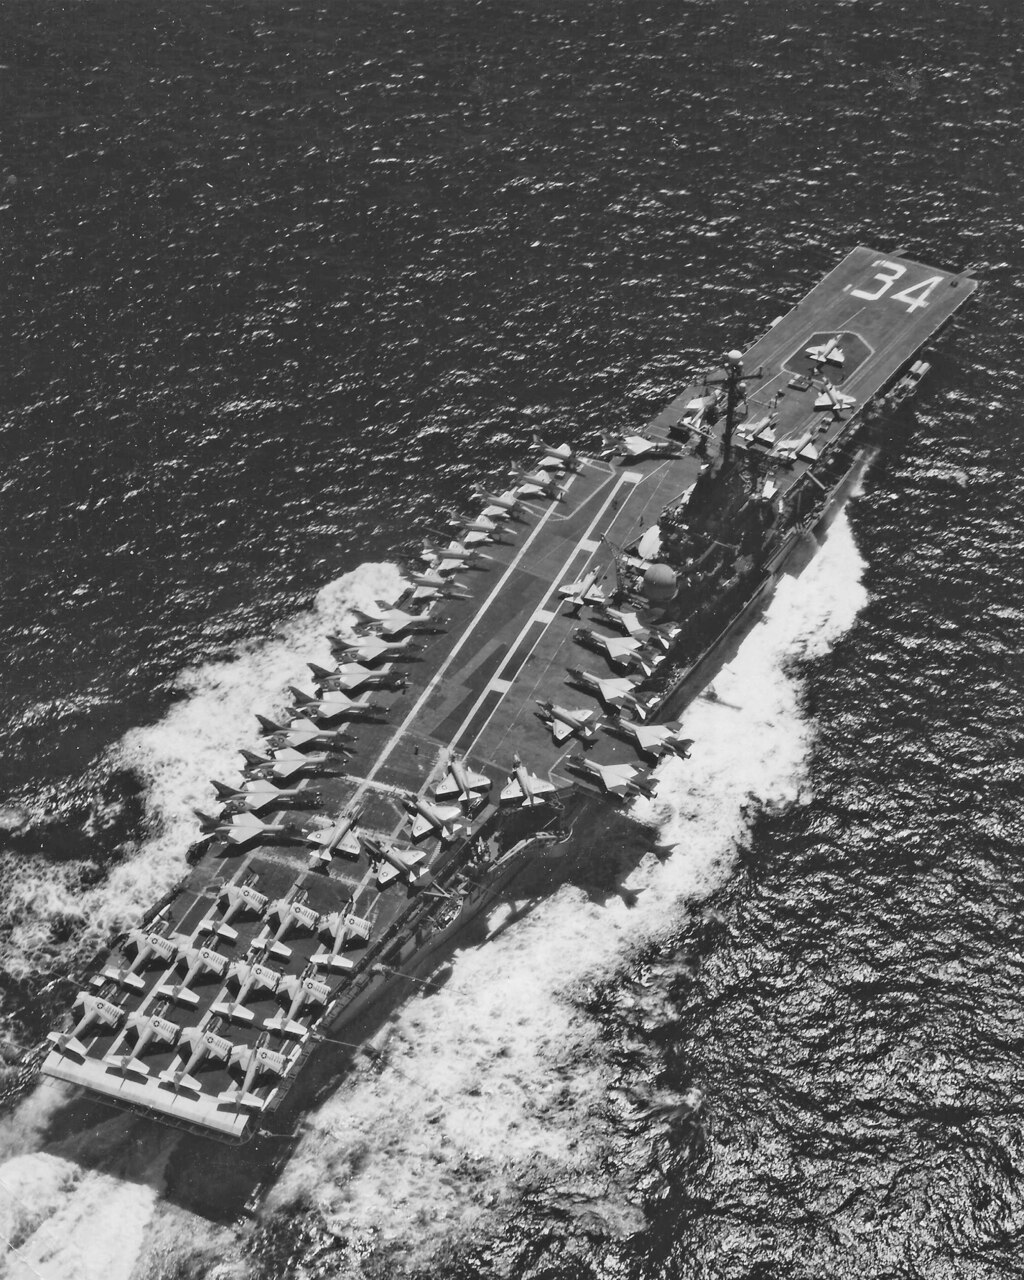 USS Oriskany (CVA 34) saw much action during Vietnam. In 1967, with CVW-16 aboard, the ship cruises the South China Sea, her flight deck is crowded with A-1 Skyraiders. A-4 Skyhawks and F-8 Crusaders. Note the lone Skyhawk on the carrier’s bow elevator, aft of the hull number. During this deployment, 39 aircraft were lost, while VF-162’s Lt. Richard Wyman used AIM-9D Sidewinders to down a MiG-17 in December in a swirling dogfight involving A-4s, other F-8s and very aggressive MiG pilots.